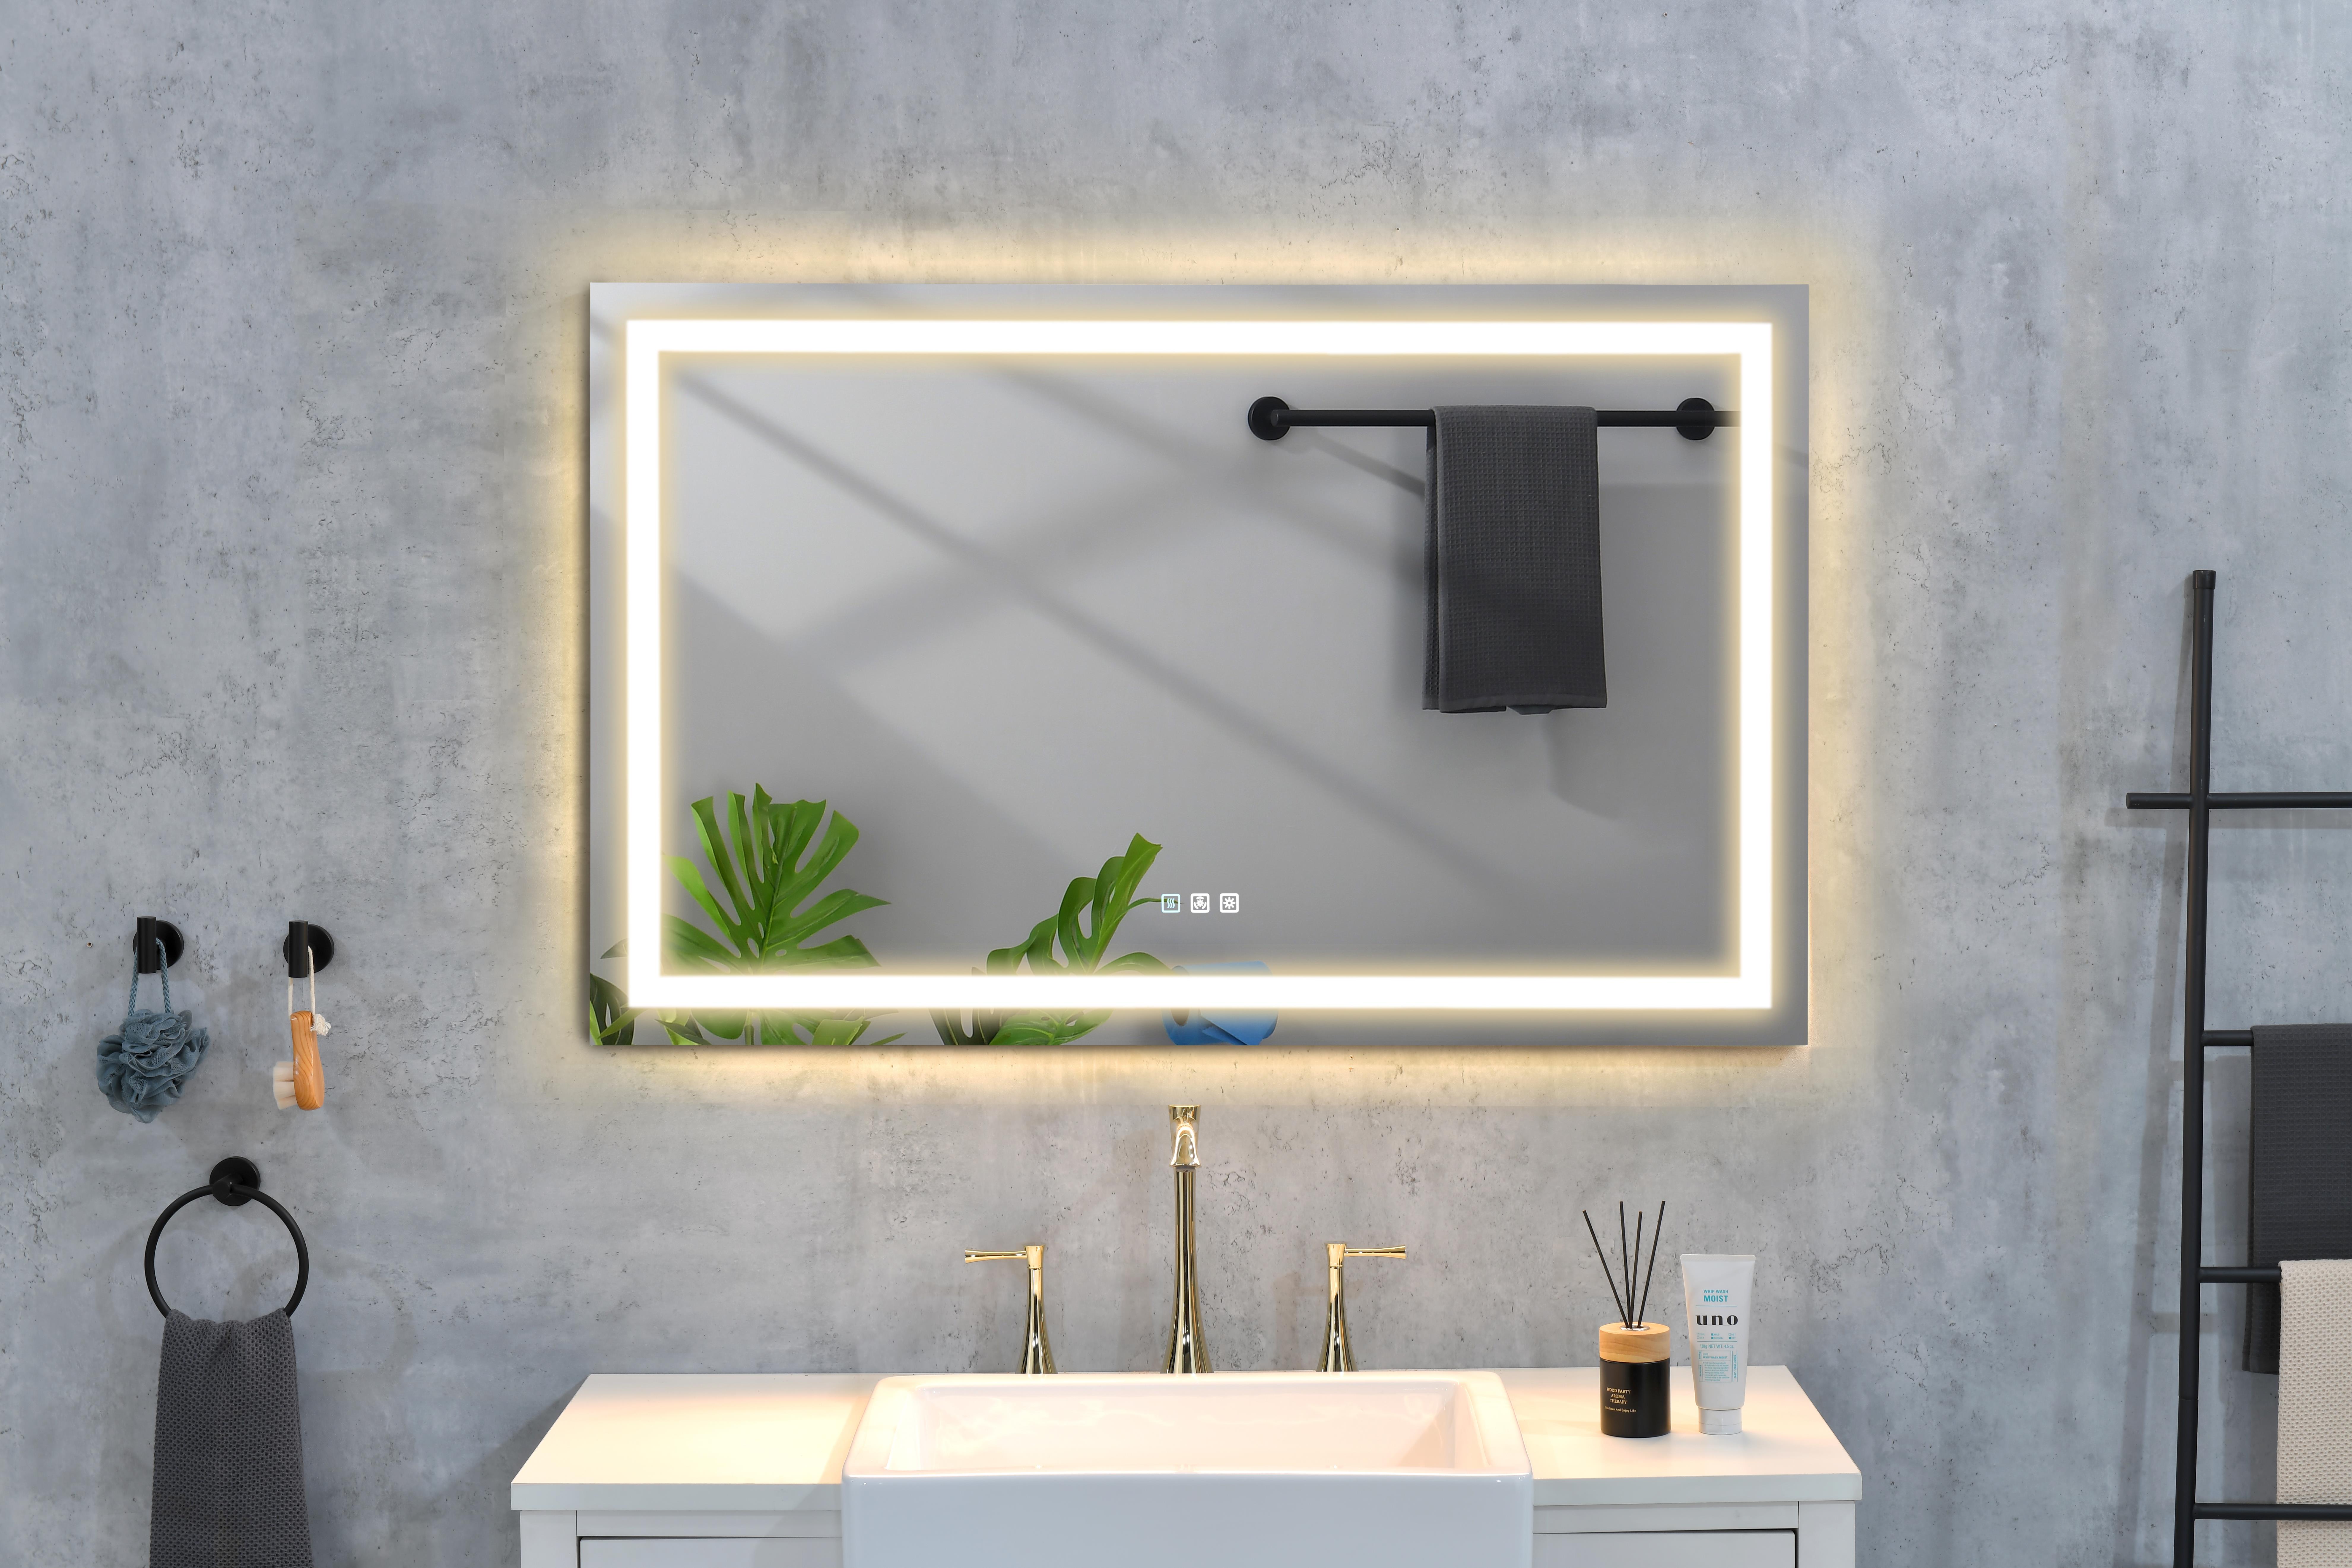 32x 24 Inch LED Mirror Bathroom Vanity Mirrors with Lights, Wall Mounted Anti-Fog Memory Large Dimmable Front Light Makeup Mirror-CASAINC